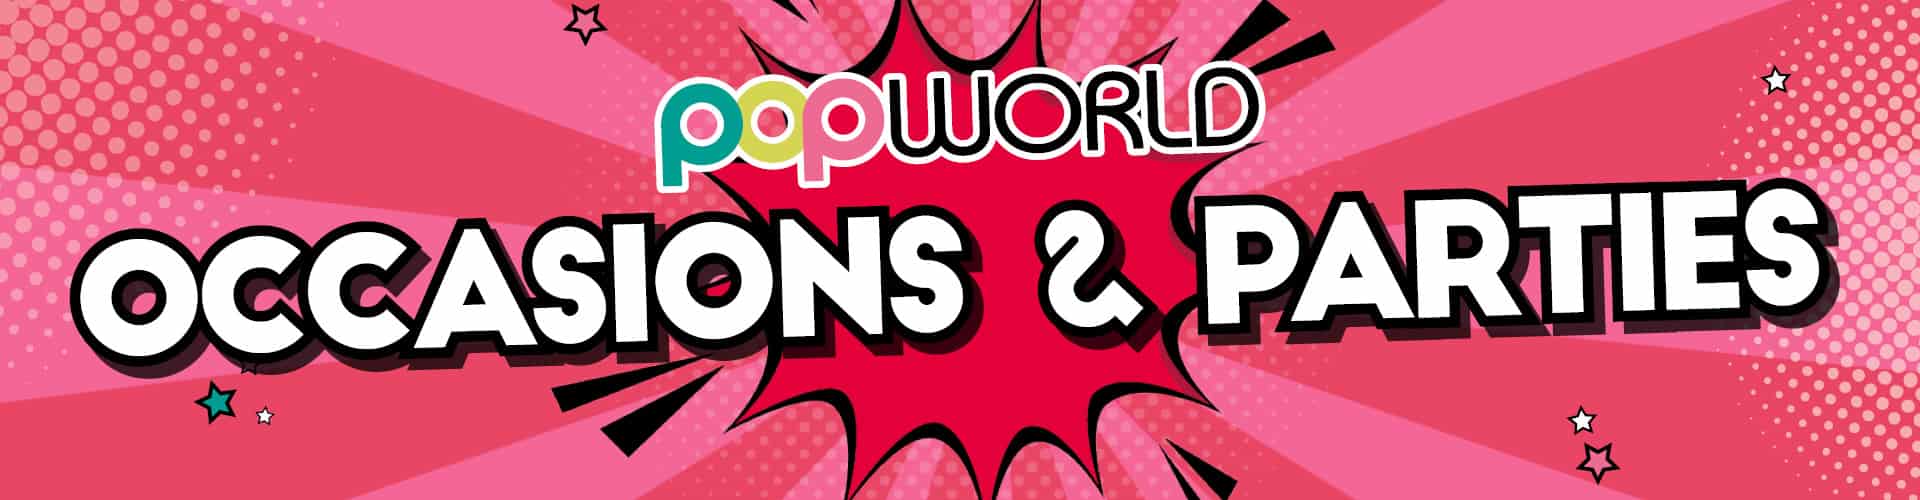 Occasions and Parties at Popworld Cheltenham